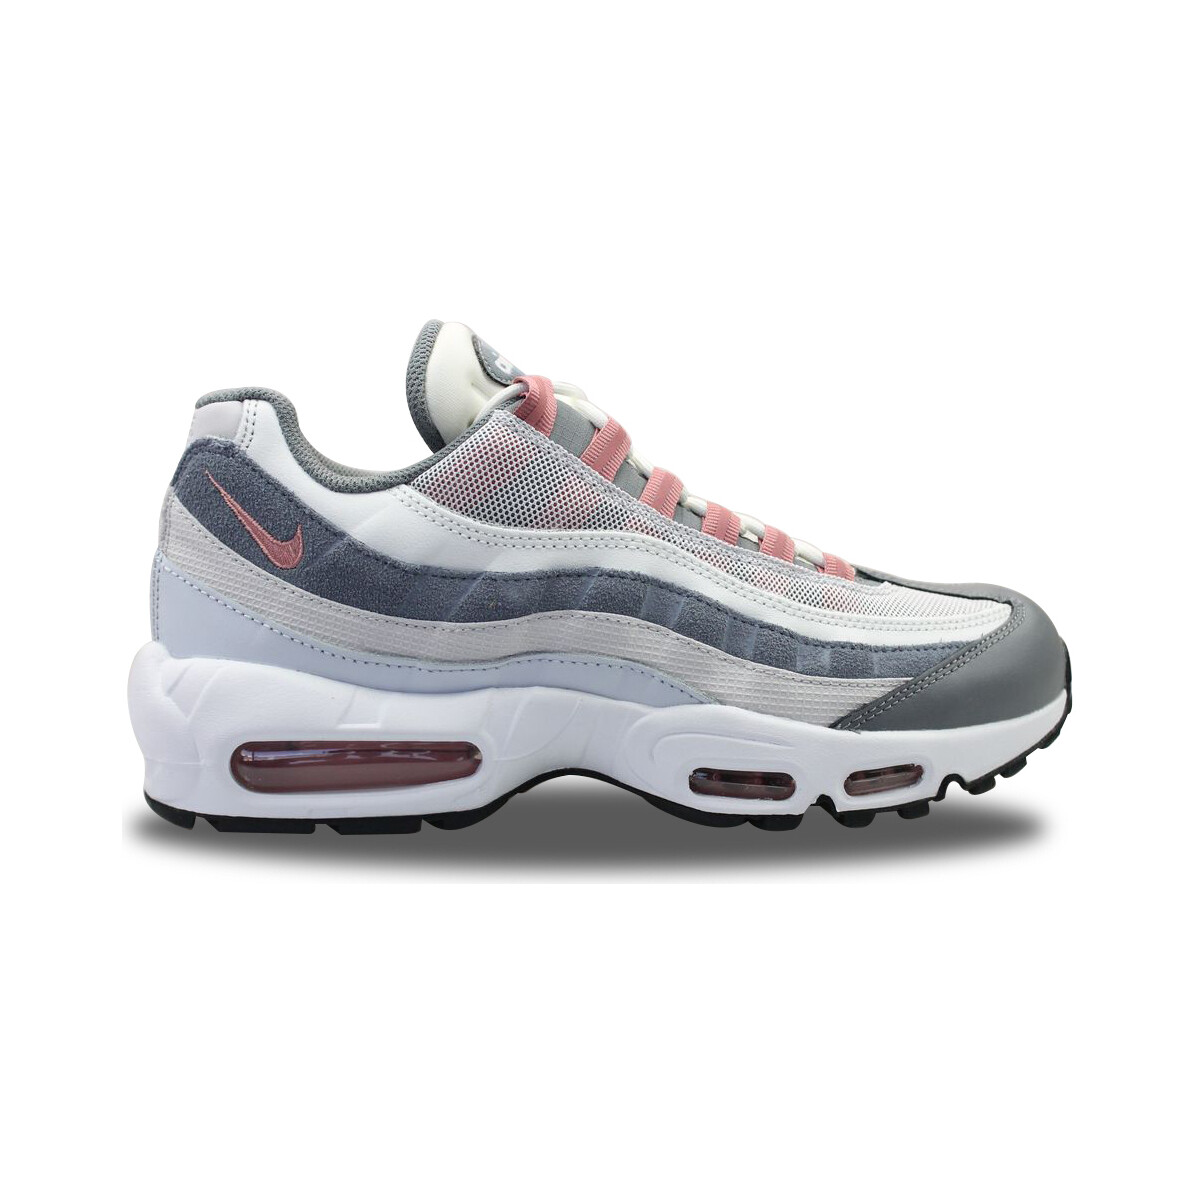 Chaussures Baskets mode Nike Air Max 95 Vast Grey/red Stardust Dm0011-008 Gris